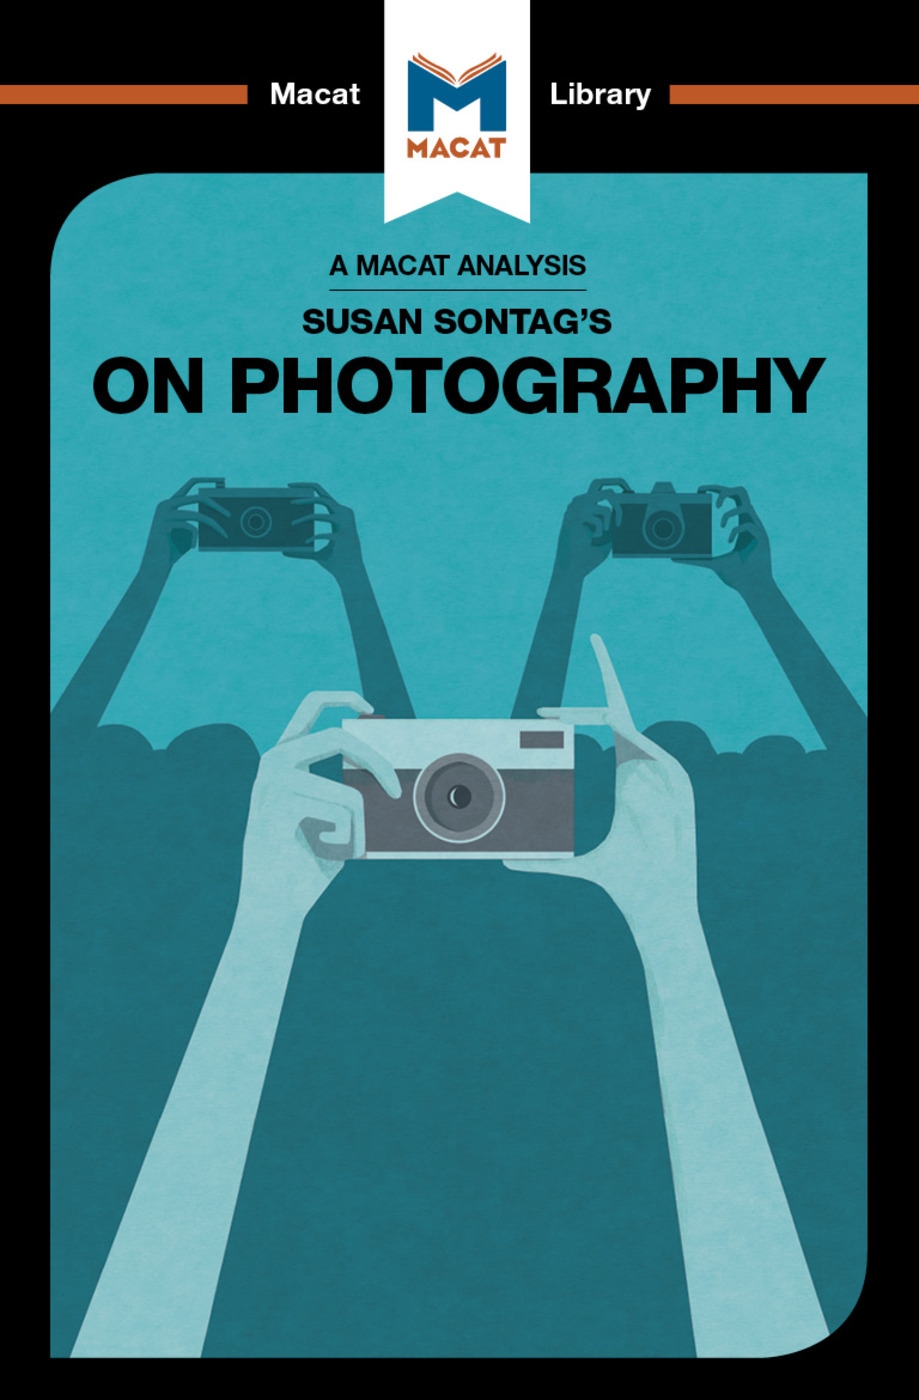 Susan Sontag’s on Photography